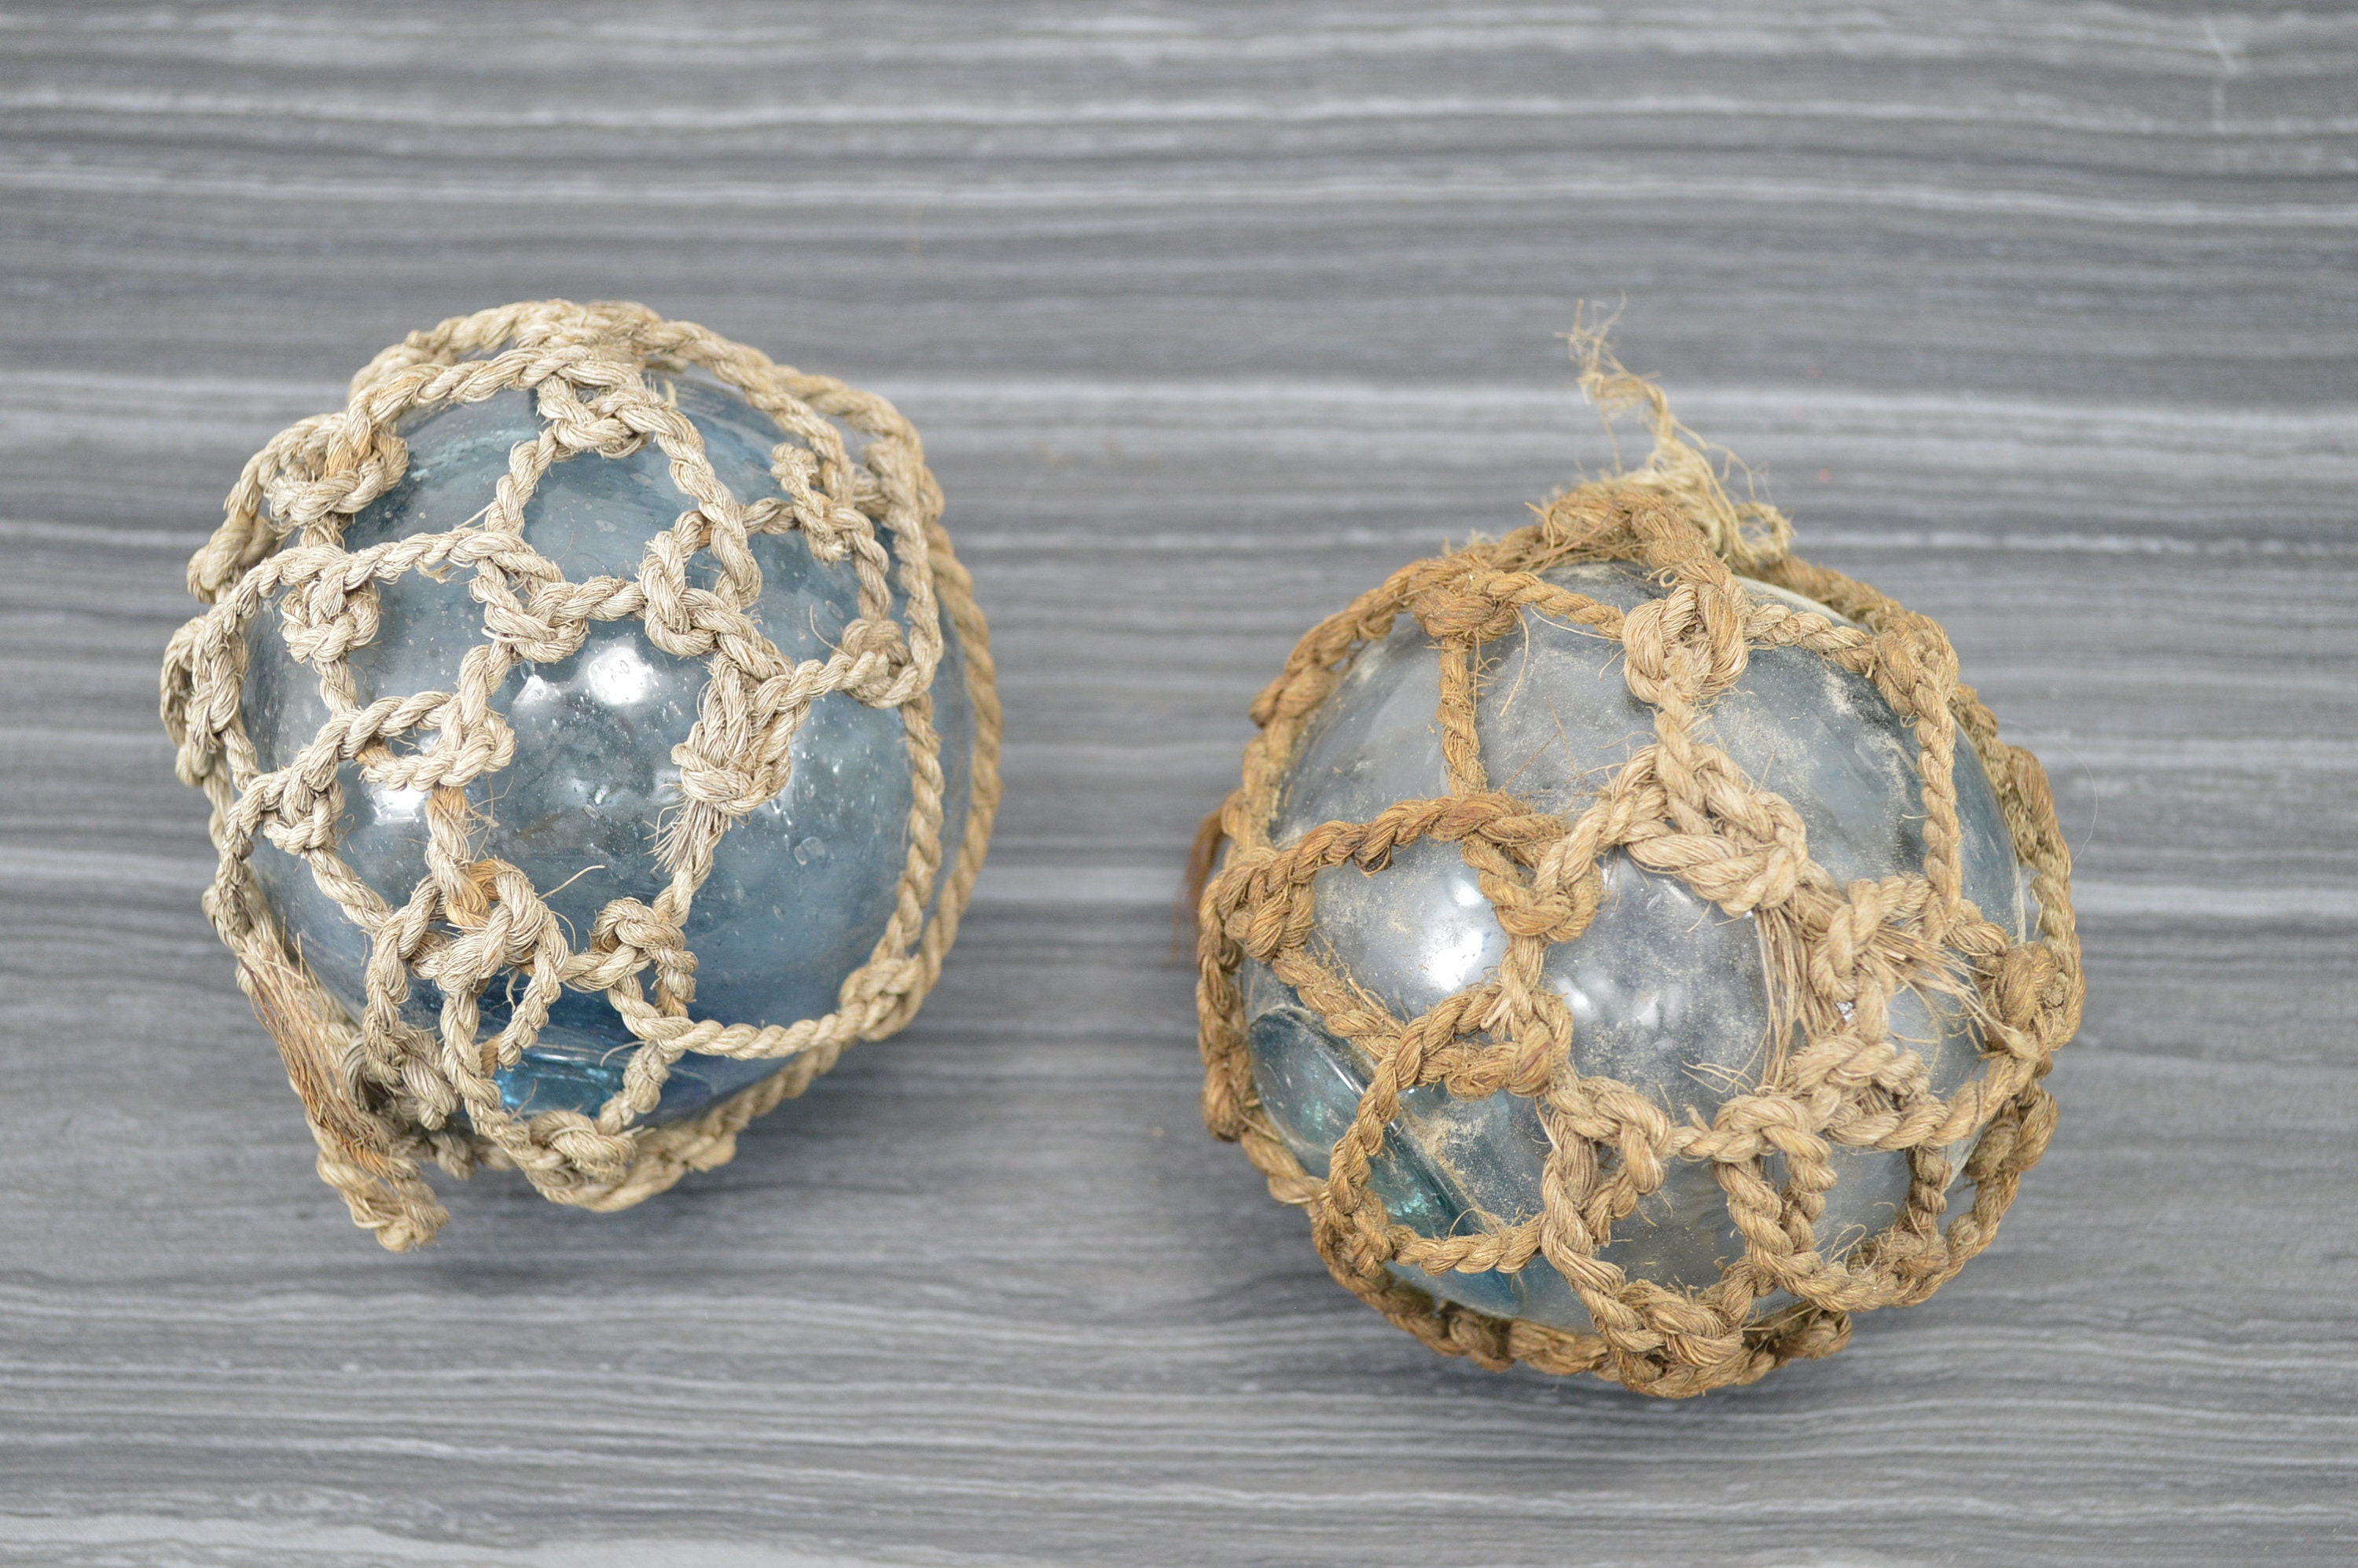 2.5 Japanese Glass Floats w/ Netting, Vintage Fishing Buoys From Japan,  Authentic Glass Balls Once Used On Nets By Commercial Fisherman